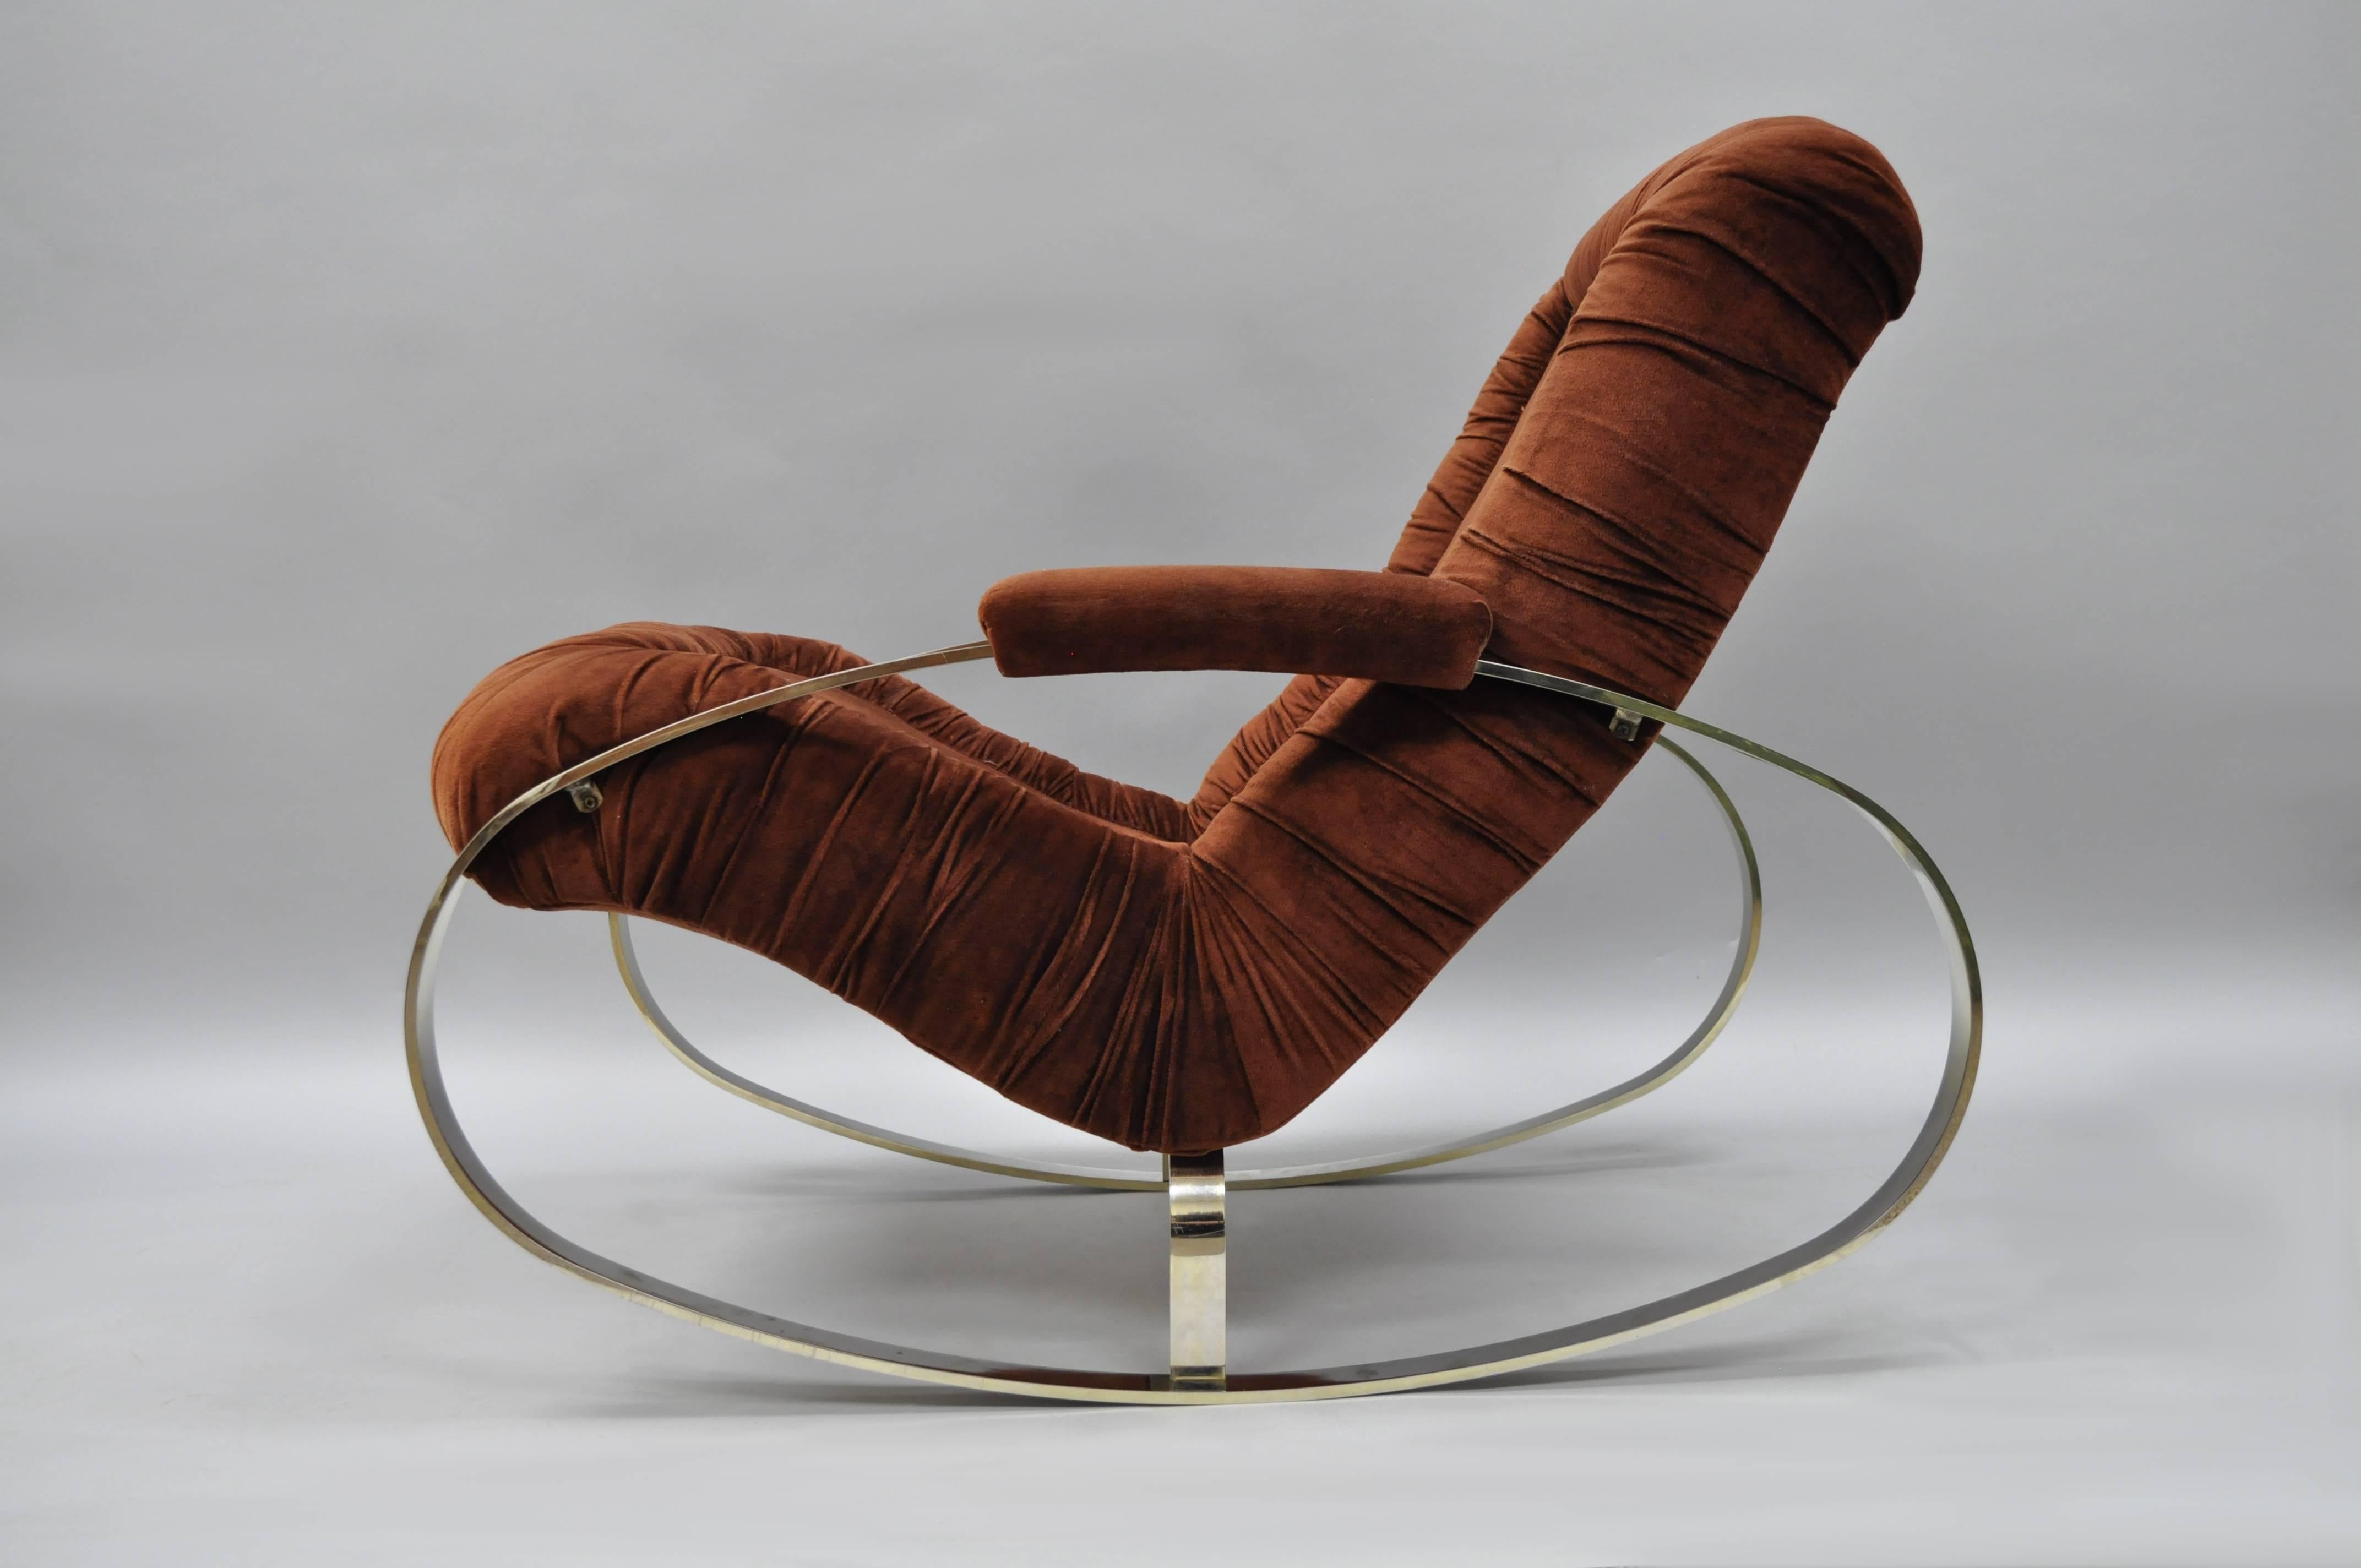 Vintage Italian Mid-Century Modern steel frame rocking chair by Guido Faleschini. Item features a heavy ovoid shaped steel frame with chrome/bronze finish, upholstered armrests, and original rust color fabric.